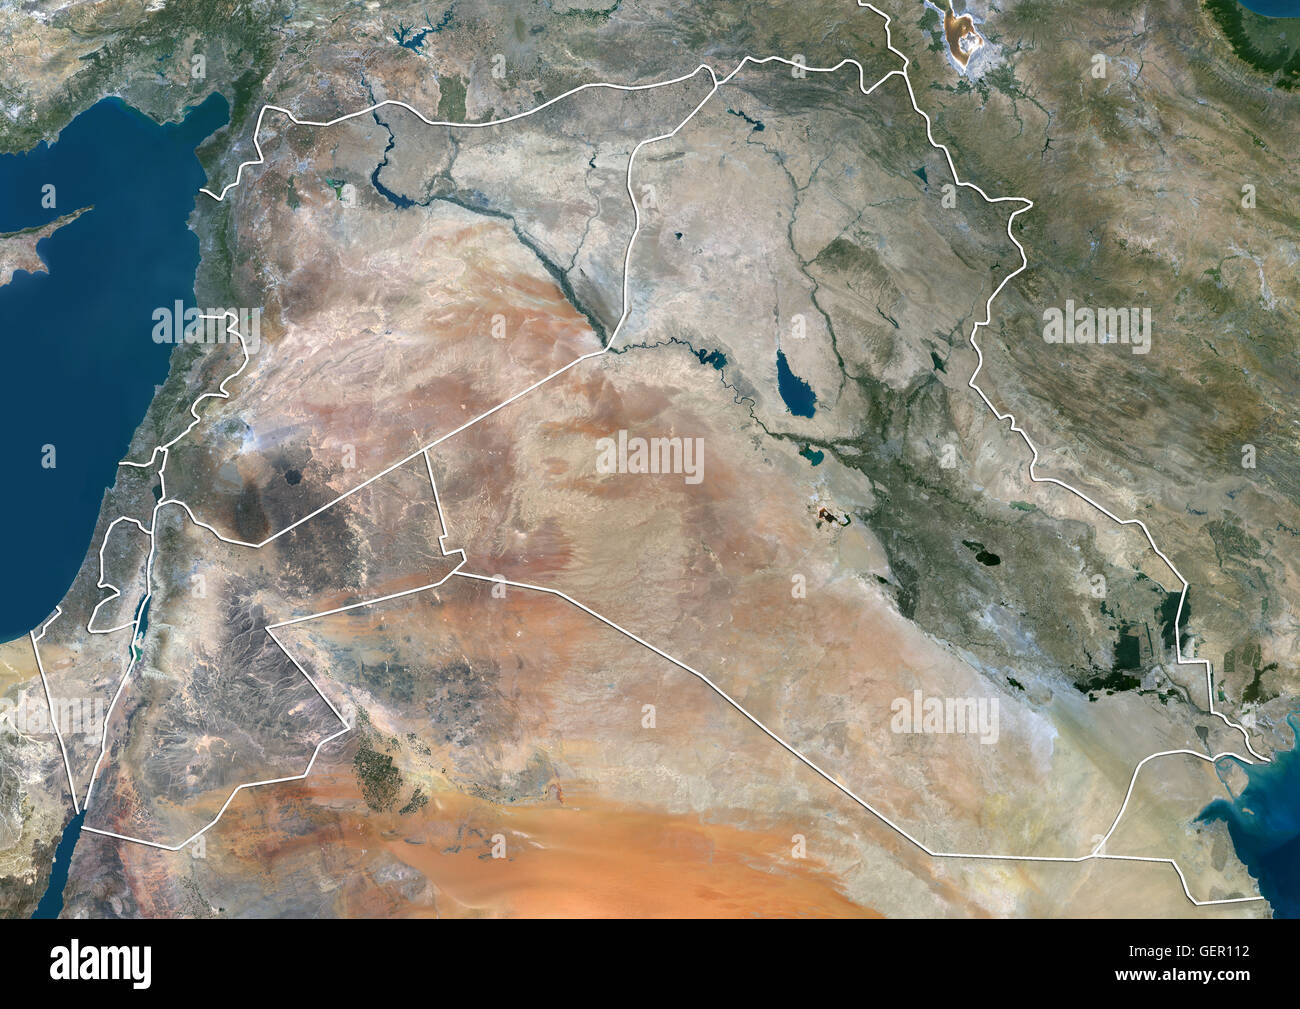 Satellite view of Syria, Iraq and Jordan (with country boundaries). This image was compiled from data acquired in 2014 by Landsat 8 satellite. Stock Photo